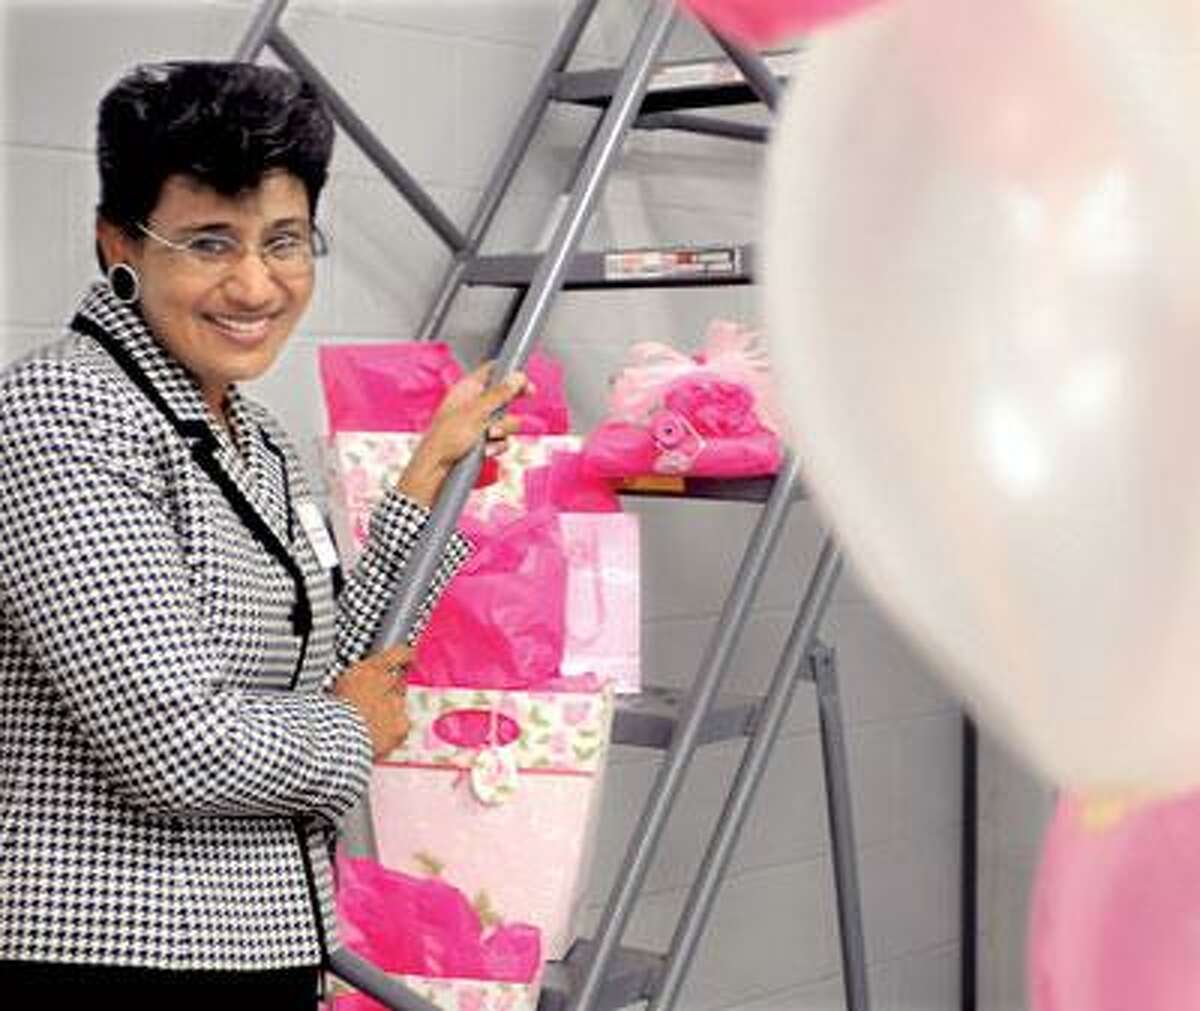 Dr. Anees B. Chagpar, the new director of the Yale Breast Center at Smilow Cancer Hospital at Yale-New Haven Hospital, was at BJ's Wholesale Club in Wallingford Wednesday for a breast cancer fundraiser. (Melanie Stengel/Register)